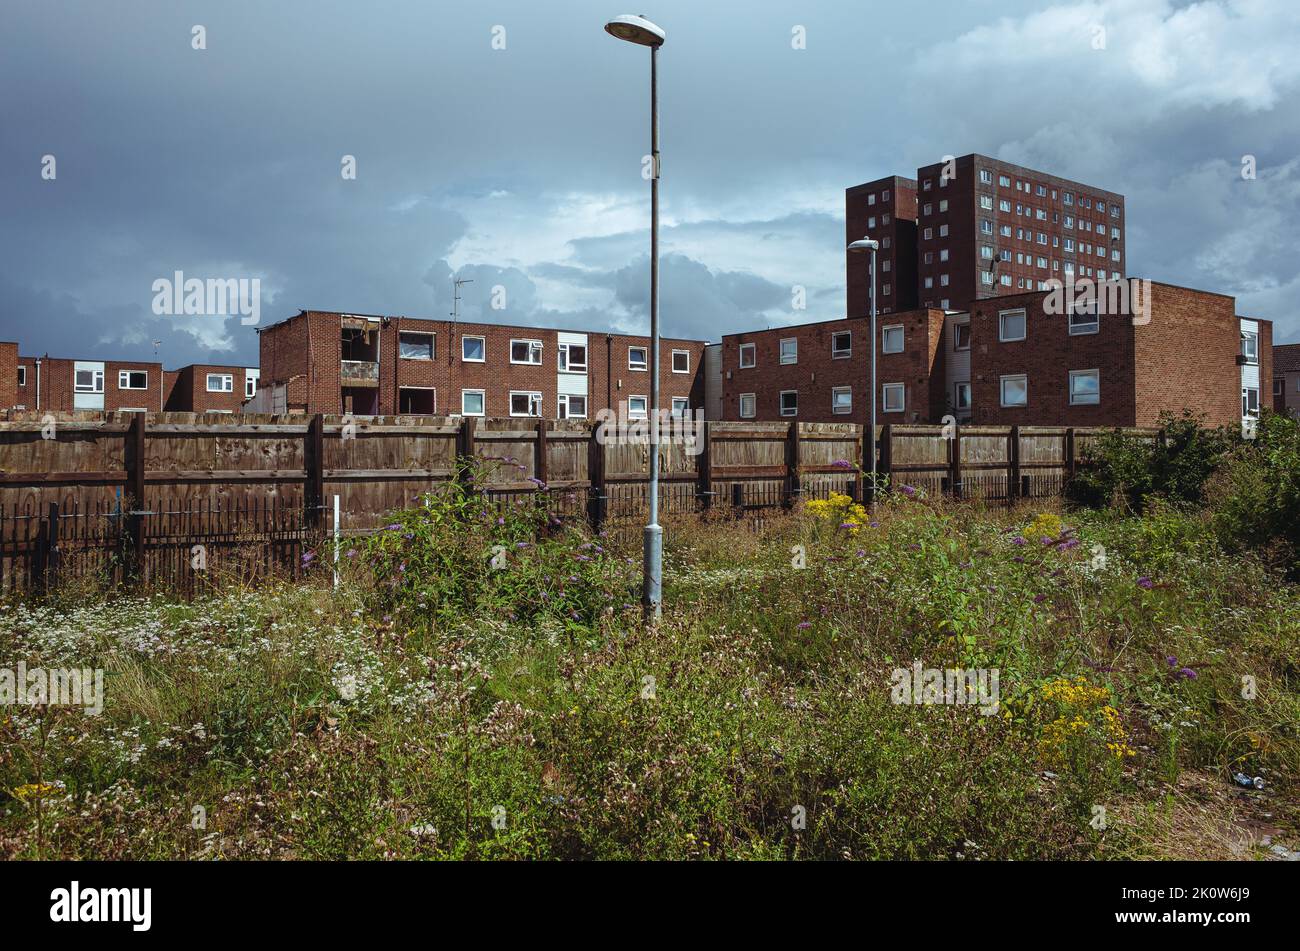 Wasteland area with council flats in background, EAST LONDON housing estate currently undergoing redevelopment, Barking and Dagenham, England, UK. Stock Photo